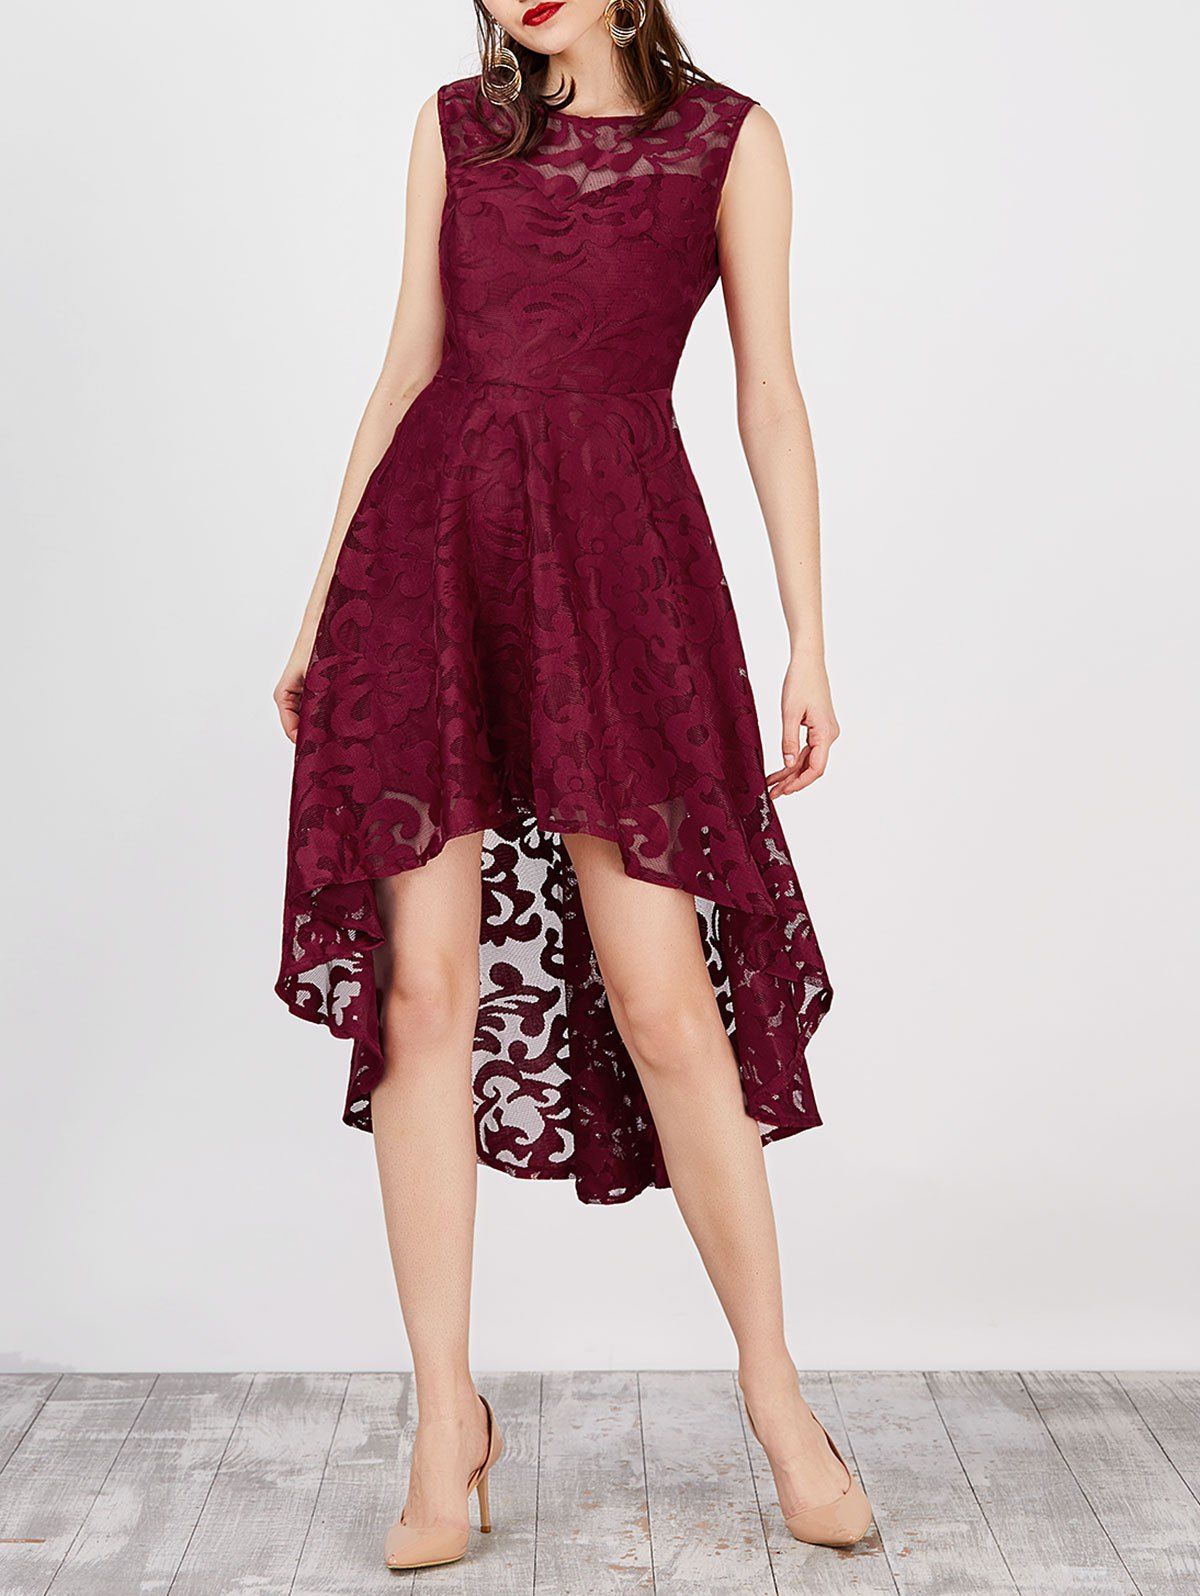 [79% OFF] Lace High Low Swing Evening Party Dress | Rosegal